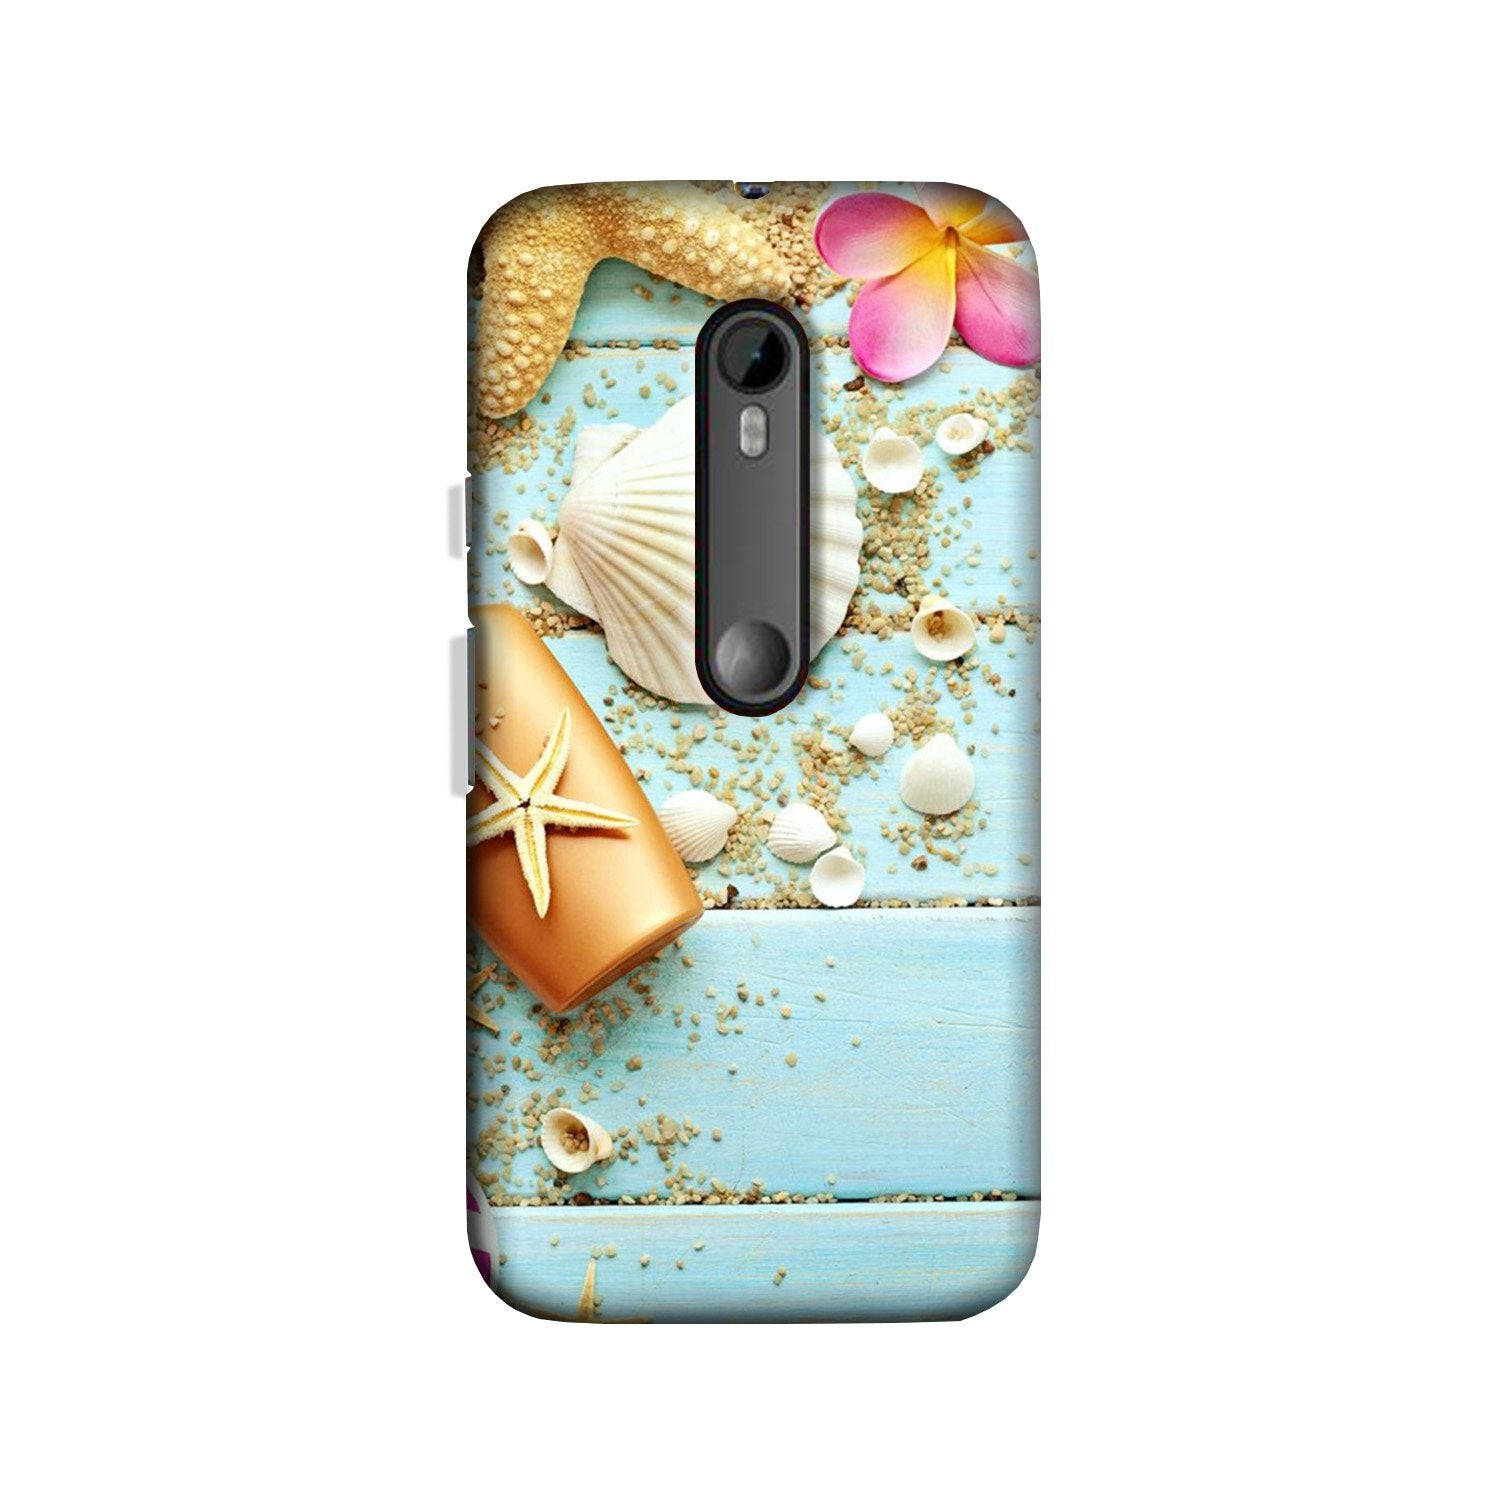 Sea Shells Case for Moto X Play